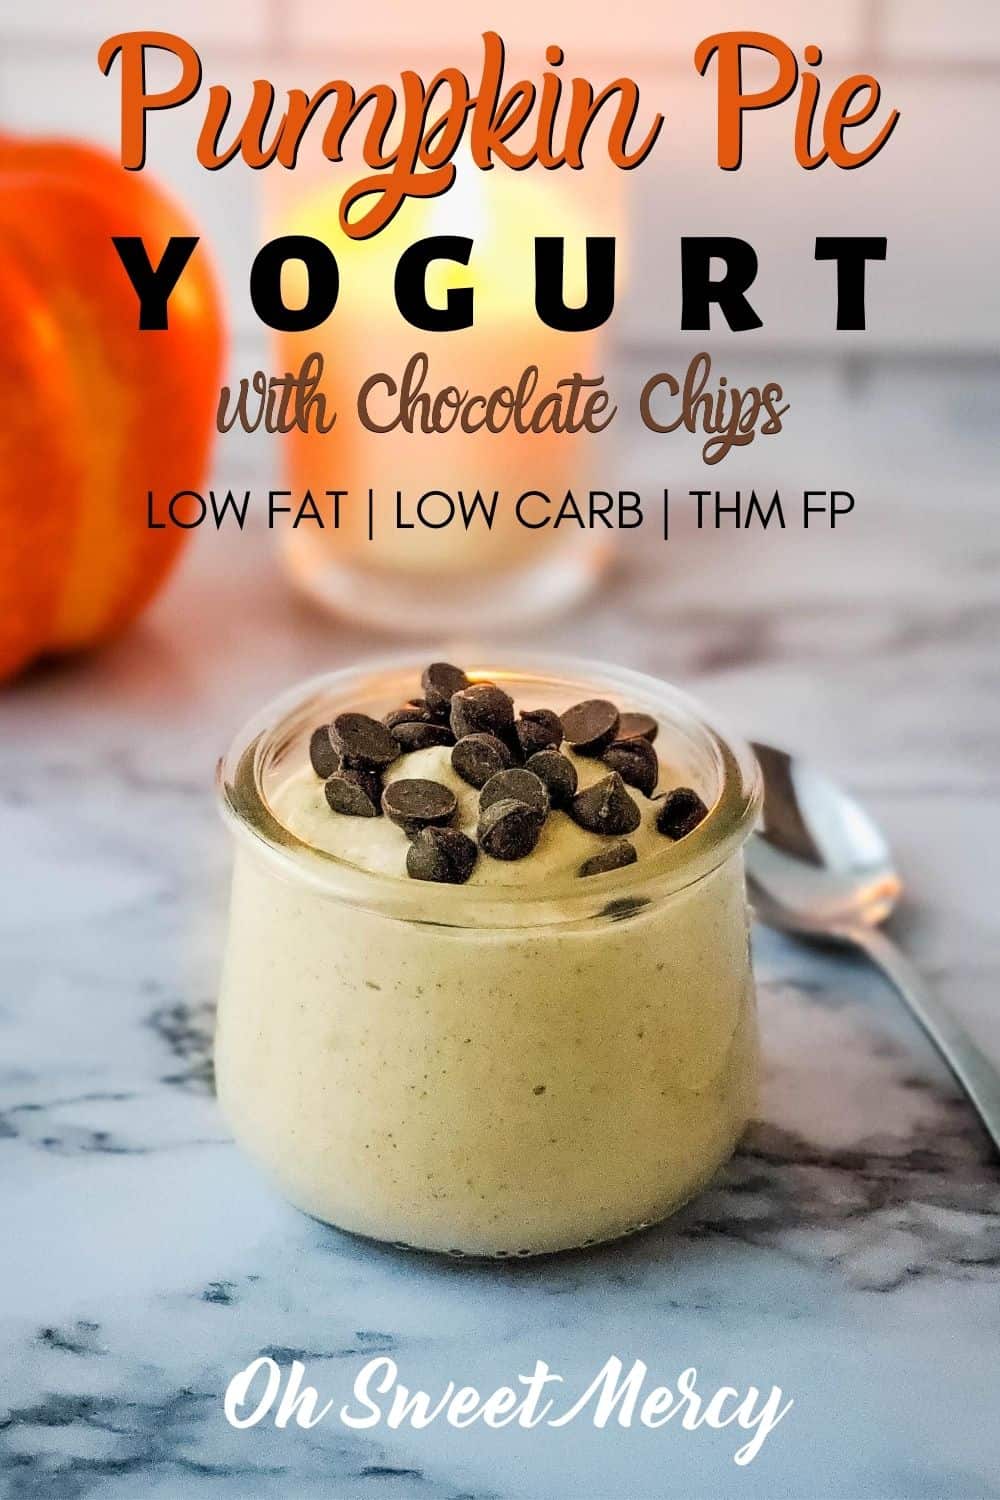 Craving the pumpkin spice but too hot for lattes or pies? Make my cool, creamy, low fat and low carb, protein packed Pumpkin Pie Yogurt with Chocolate Chips instead. Perfect for snacks, quick and easy mealas, packing in lunches, camping, and anytime you need a THM FP snack or dessert. #lowfat #lowcarb #healthy #skyr #pumpkinspice #thm #fuelpull #thmfp #thmsnacks #thmdesserts #yogurt @ohsweetmercy